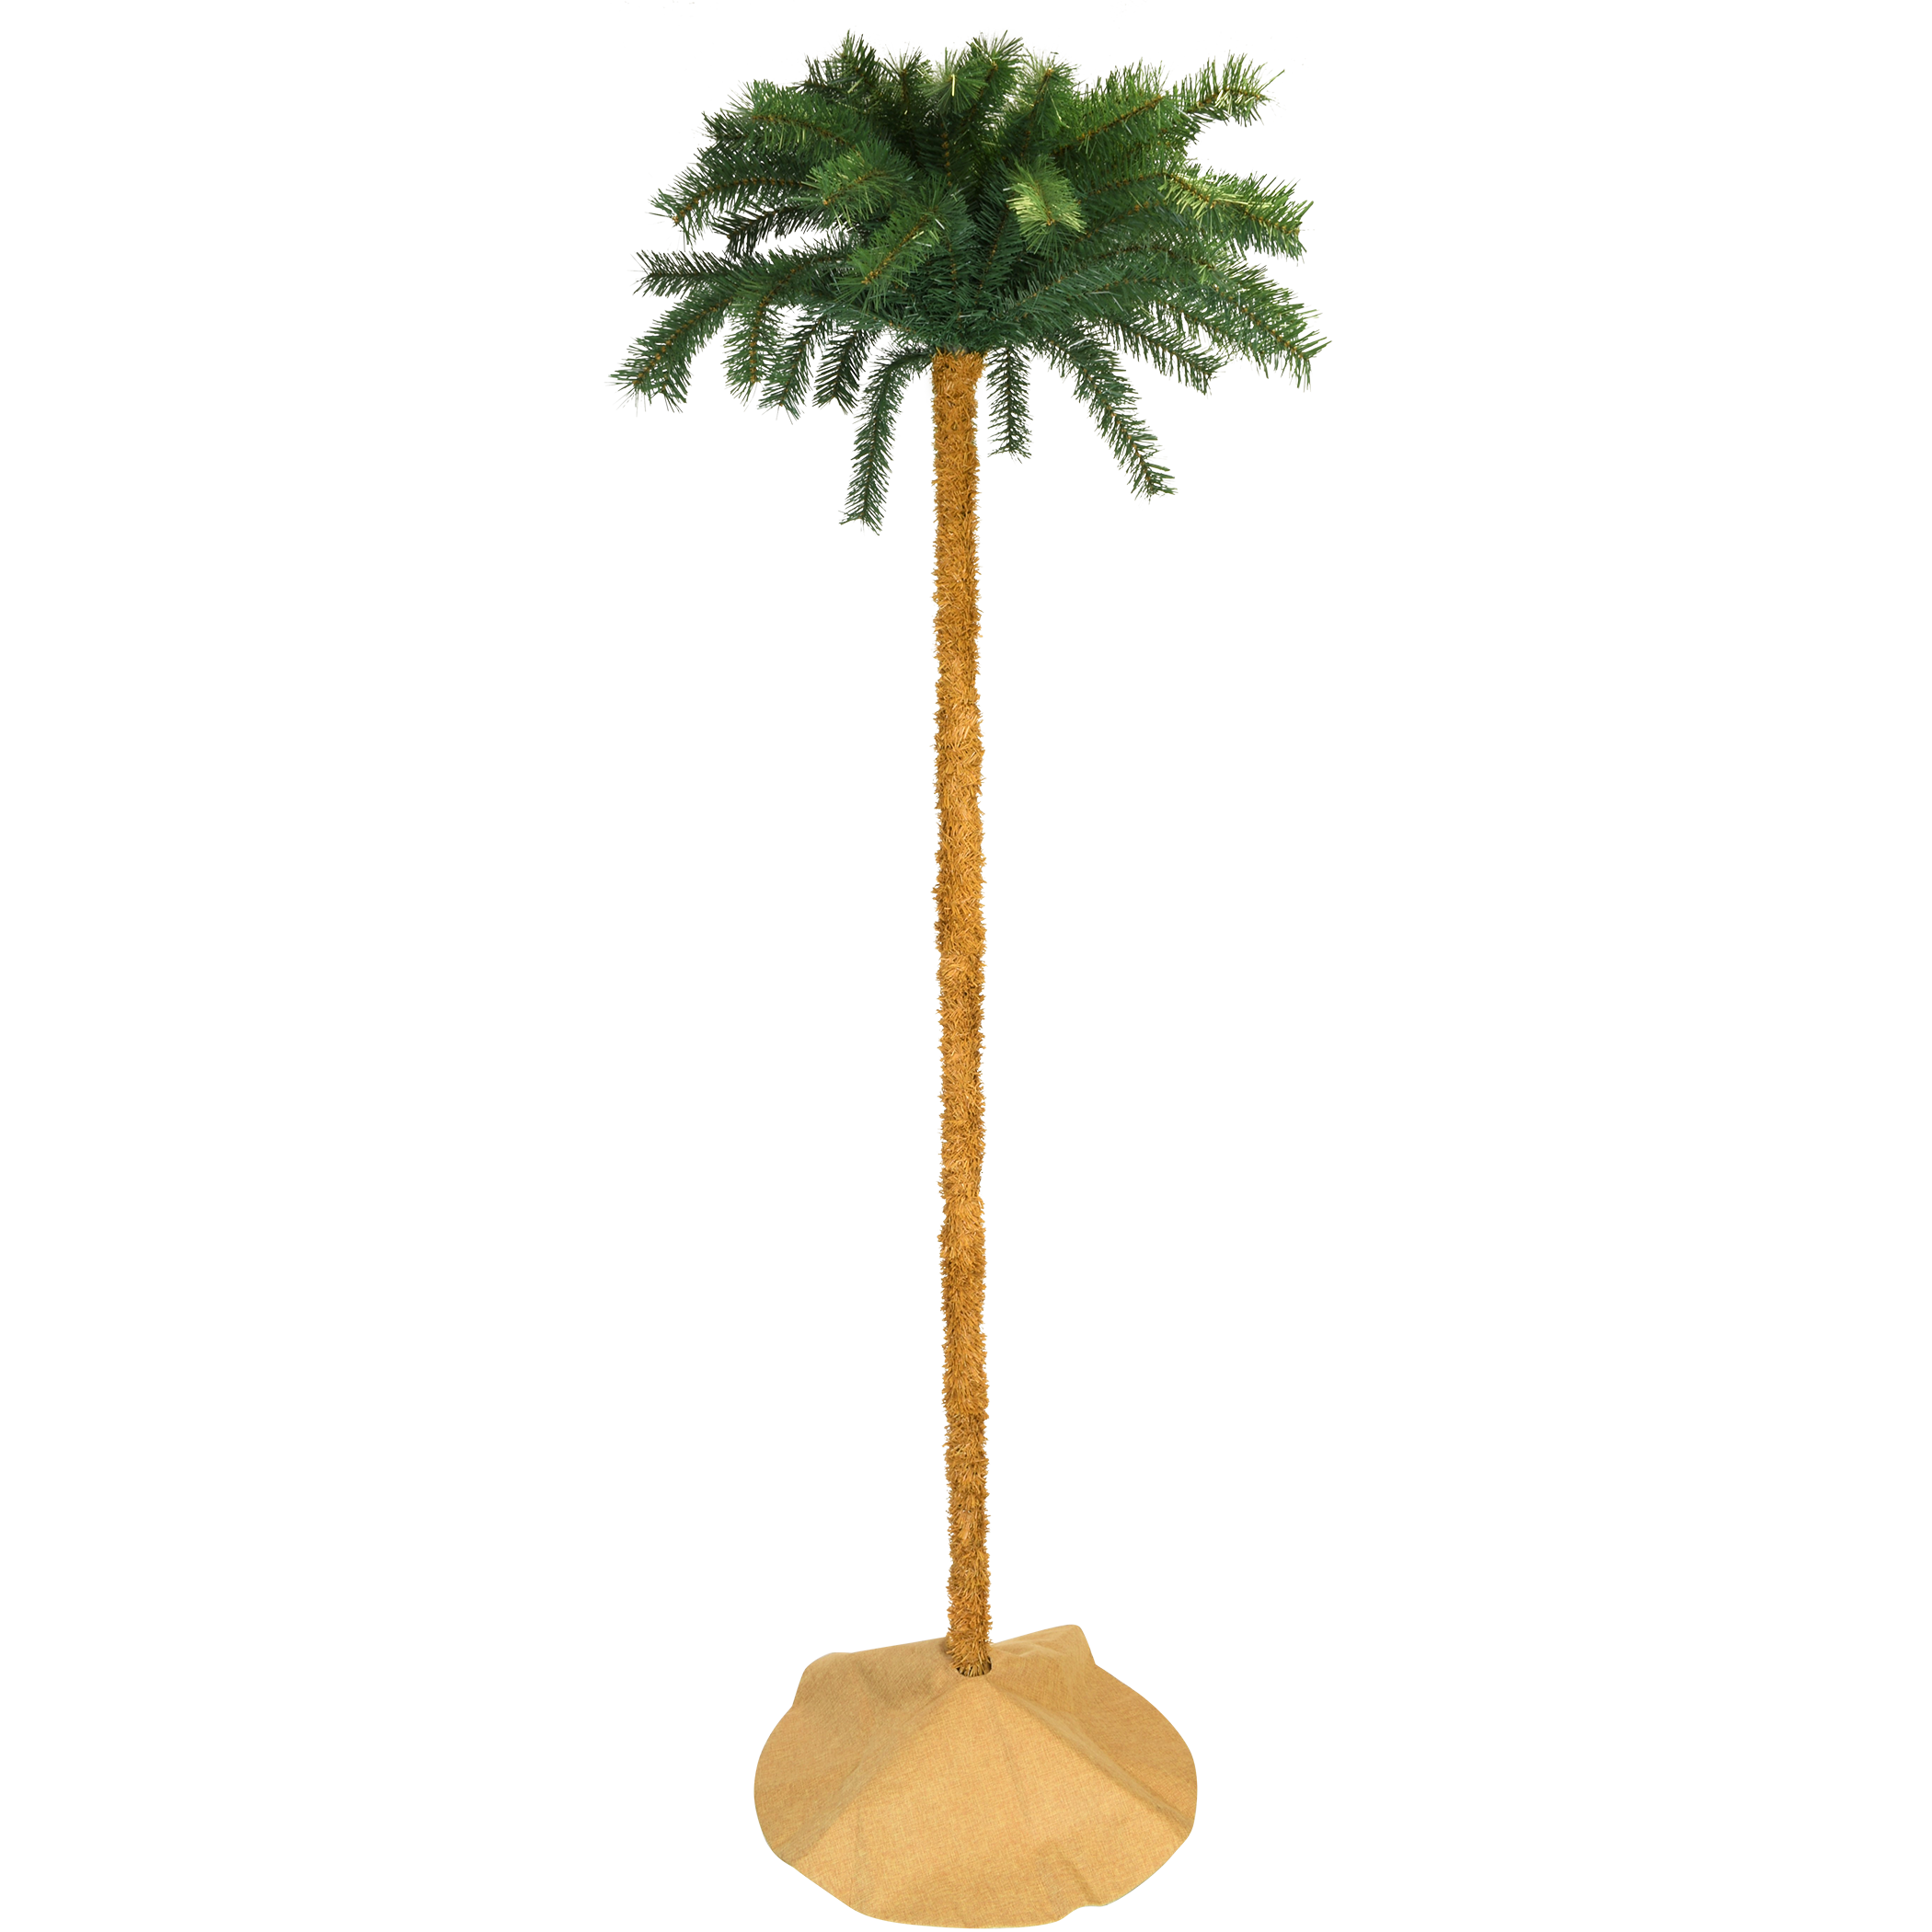 50% Off Sale! - 7 Foot Tall Palm Tree Christmas Tree with Sand Colored Skirt